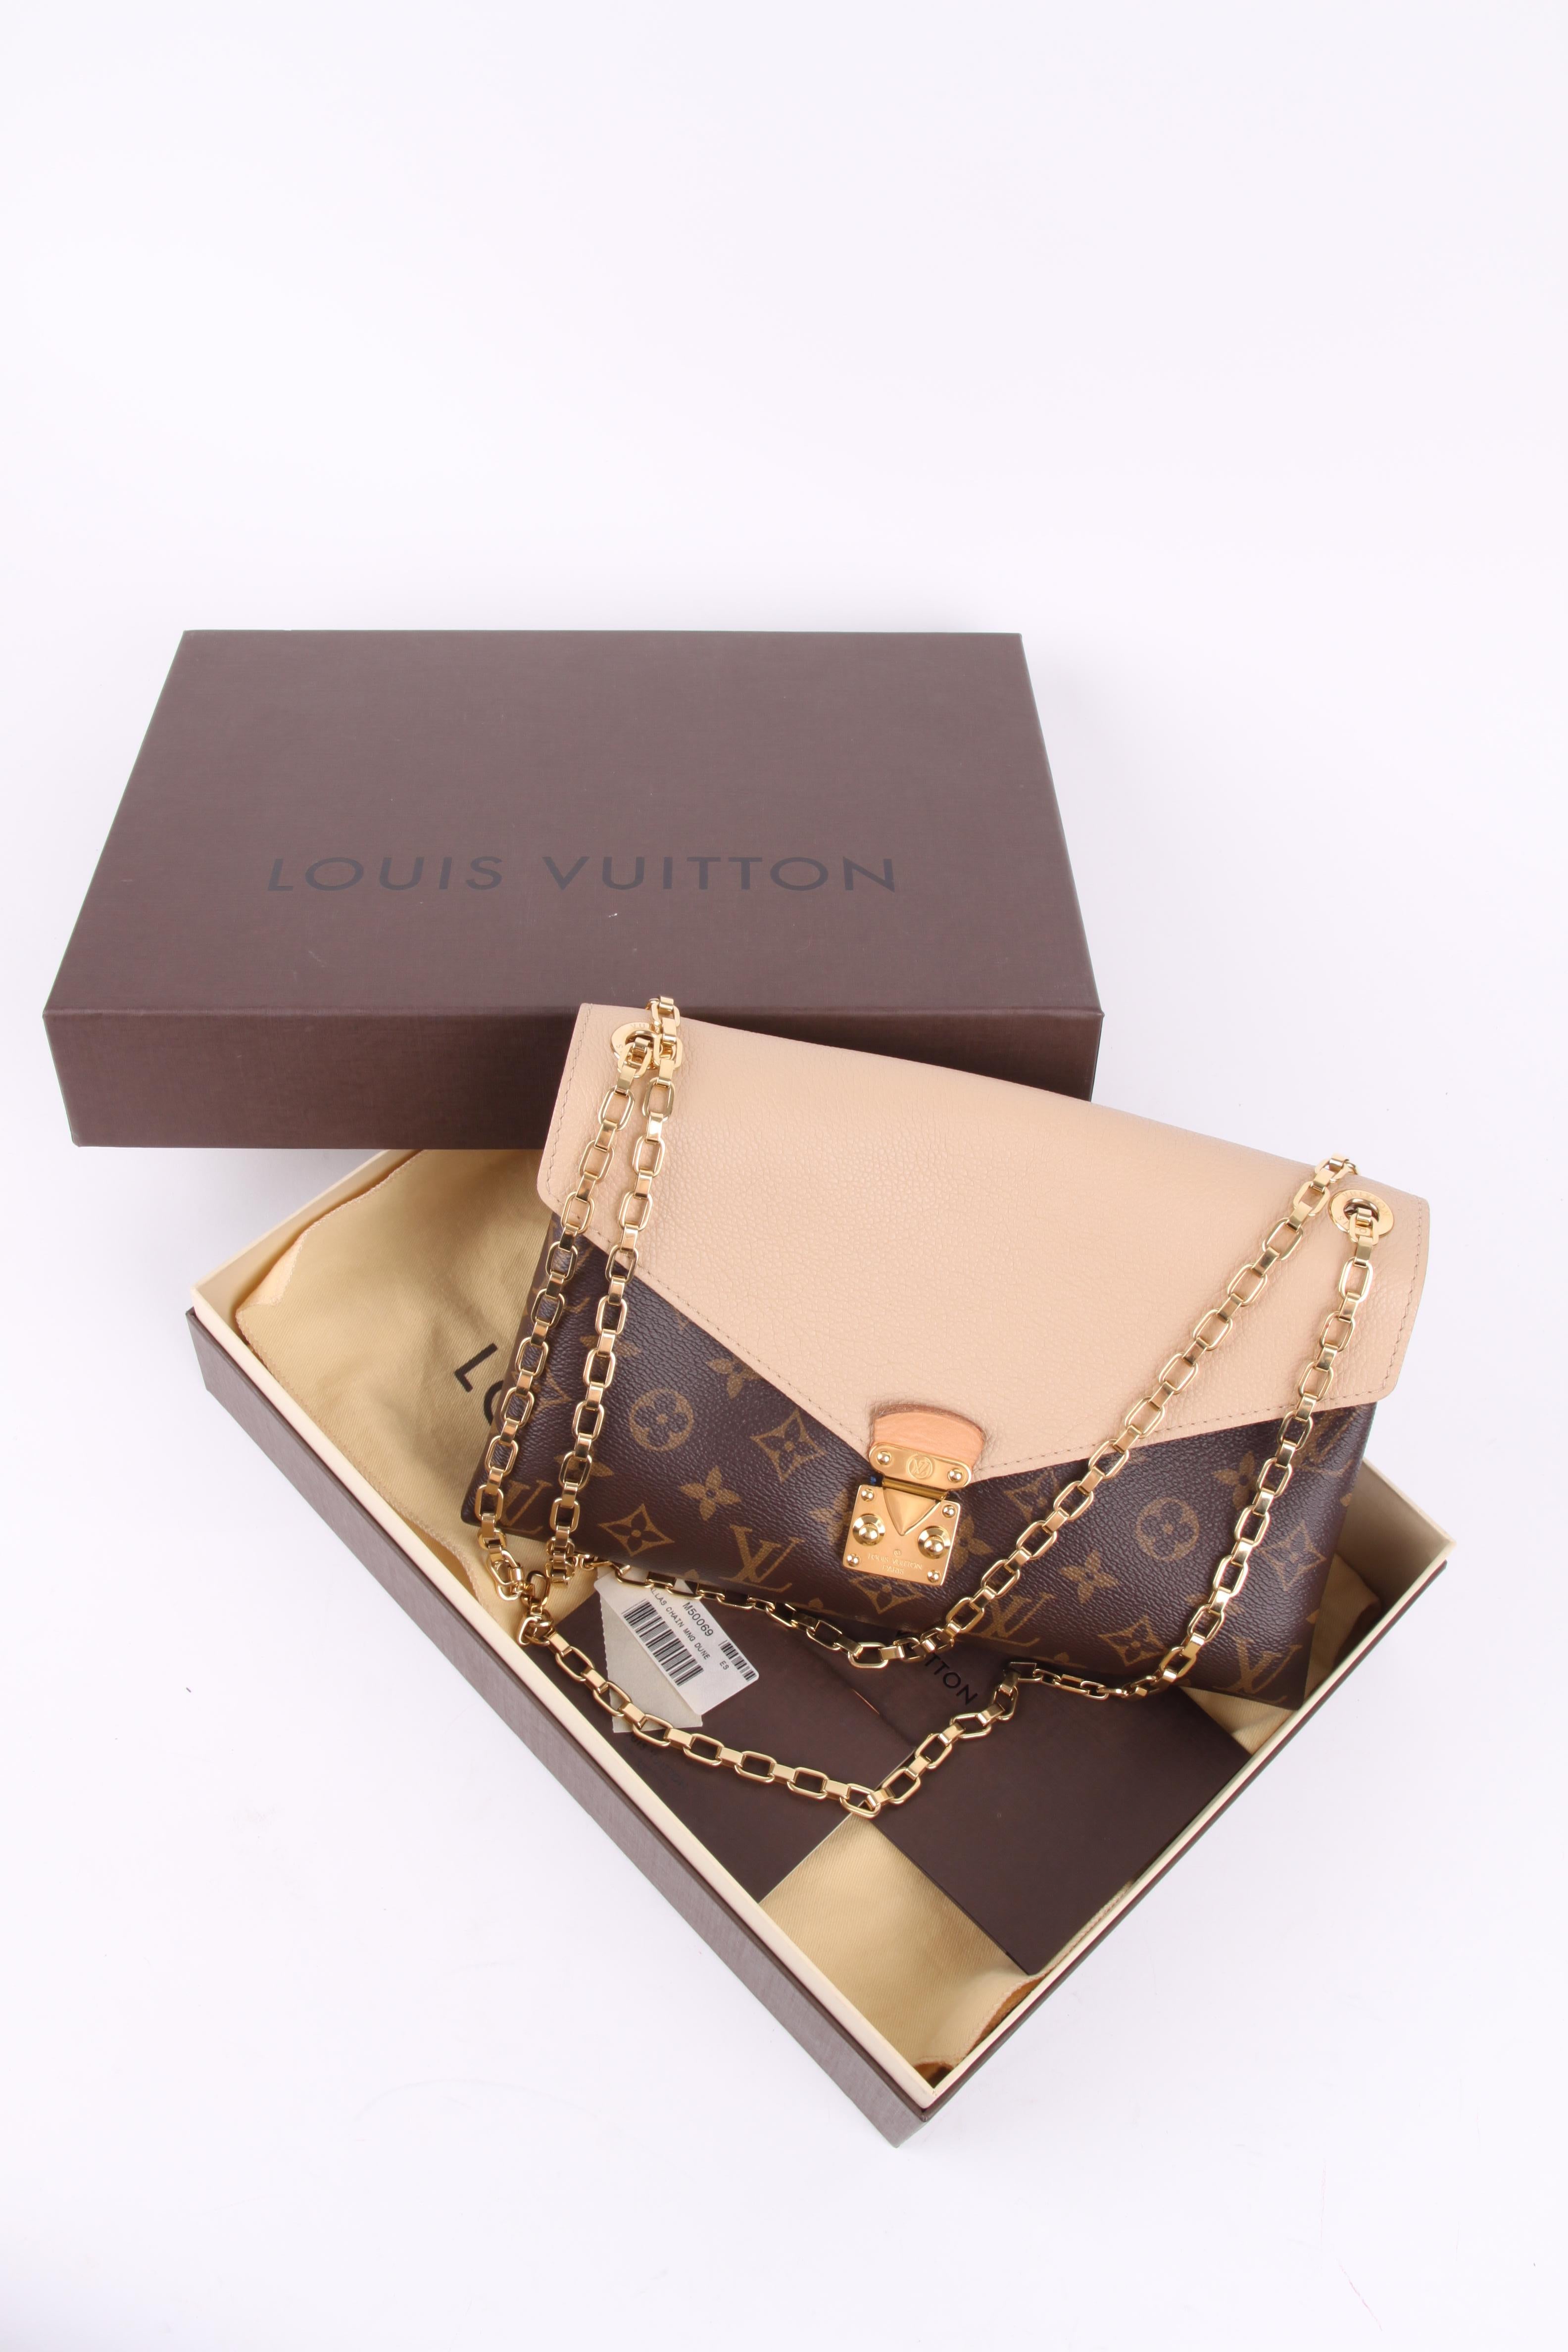 Louis Vuitton Dune Monogram Canvas Pallas Chain Bag.

This striking combination of Monogram canvas and a dash of modern color makes this Pallas wallet a must-have! Calf leather lining in Dune creates a luxuriously appealing wallet that opens with an